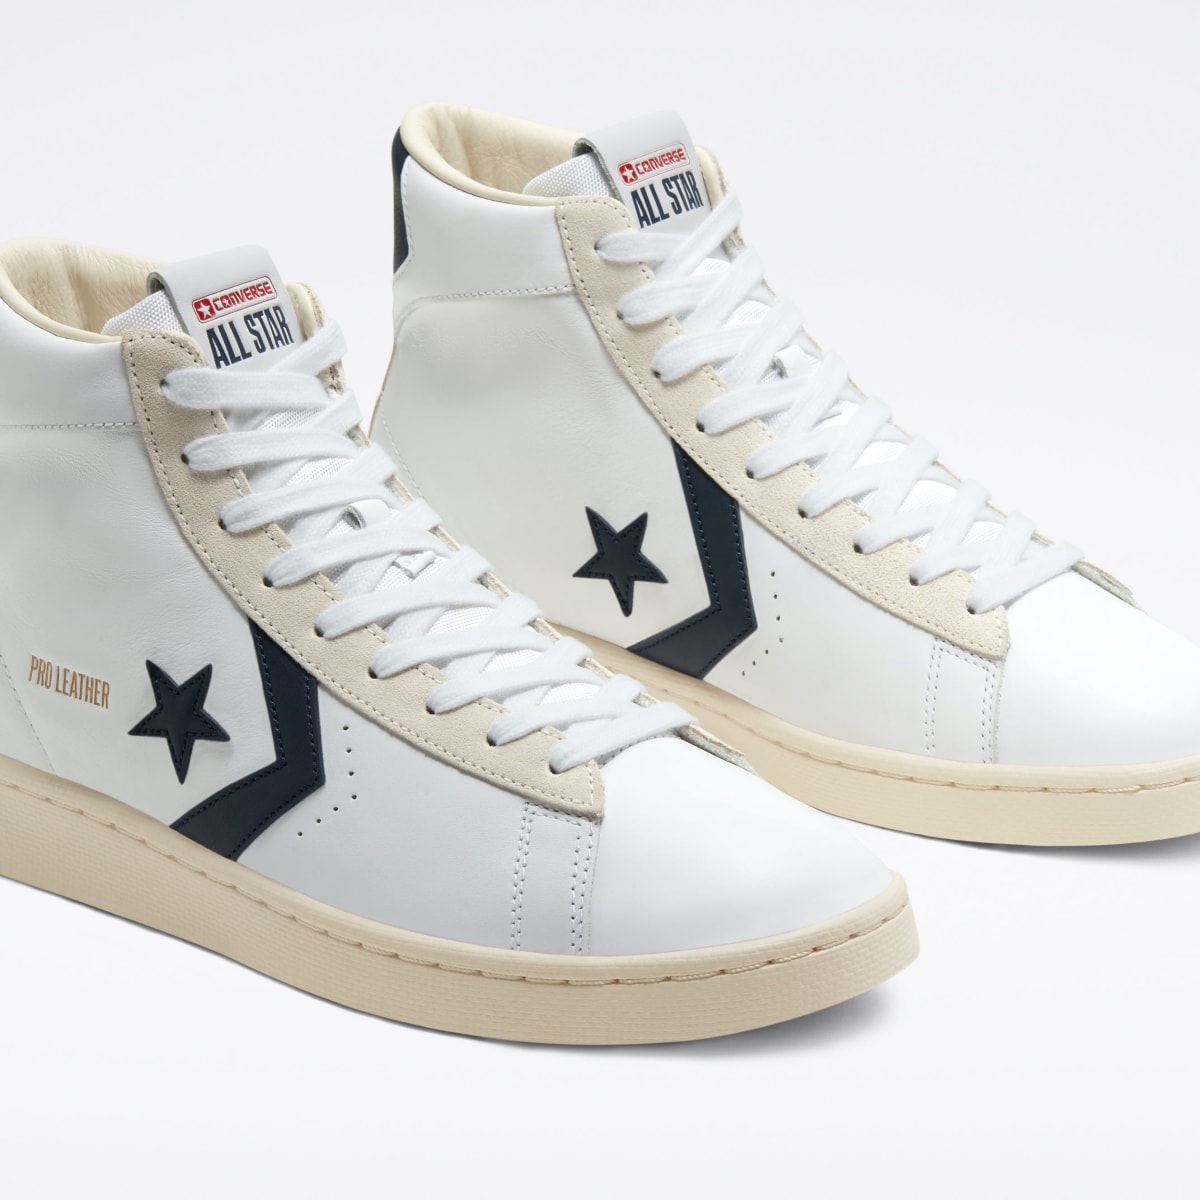 Converse's latest Pro Leather celebrates its history on the